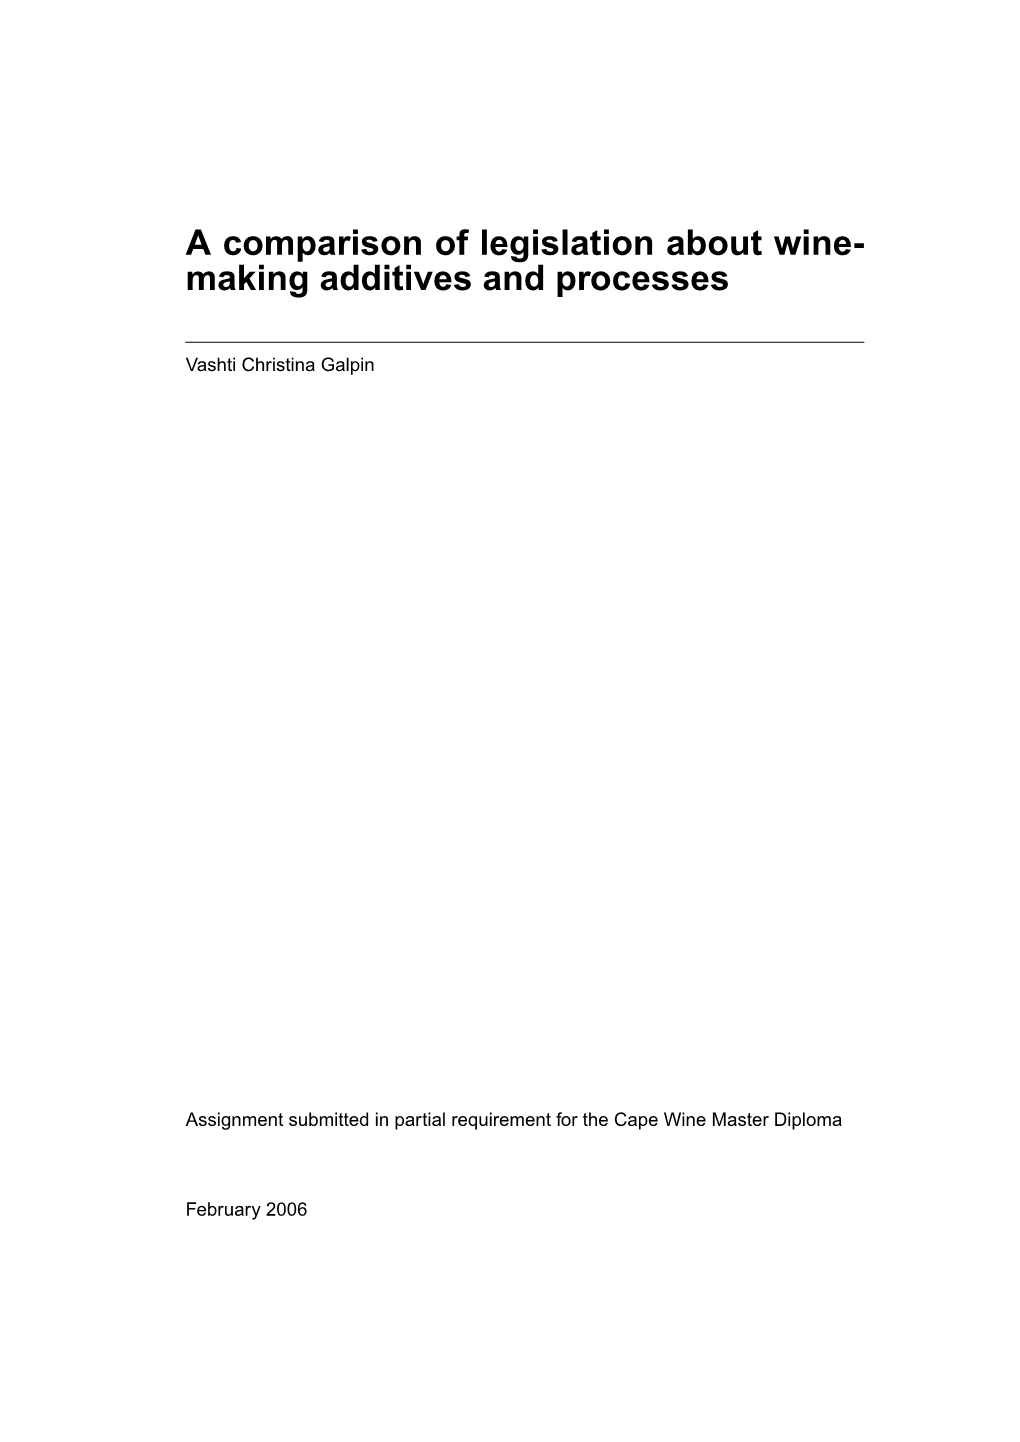 A Comparison of Legislation About Wine- Making Additives and Processes